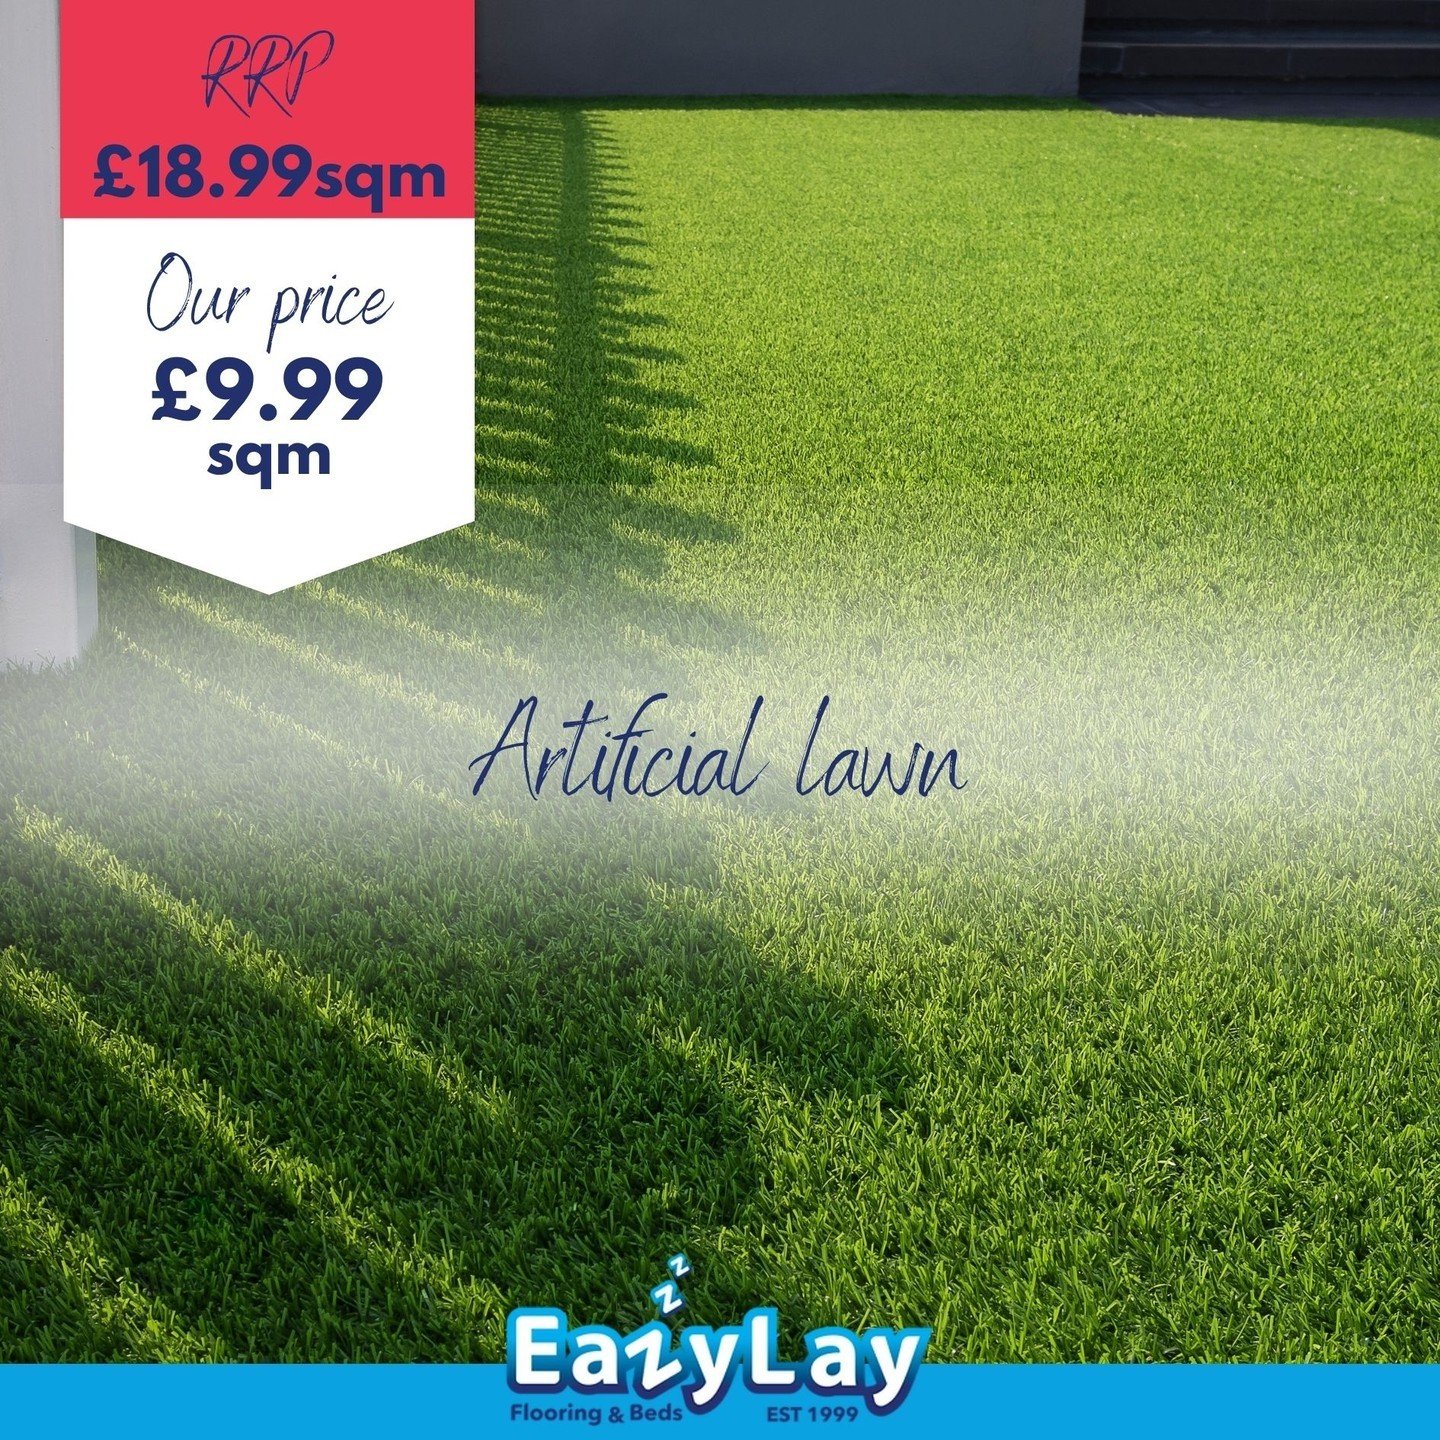 Get the lush green lawn of your dreams for less! Our 40mm quality artificial lawn, with an RRP of &pound;18.99, is now available for just &pound;9.99 per square meter. Don't miss out, hurry in while stocks last!

#ArtificialGrass #LawnGoals #LushLawn